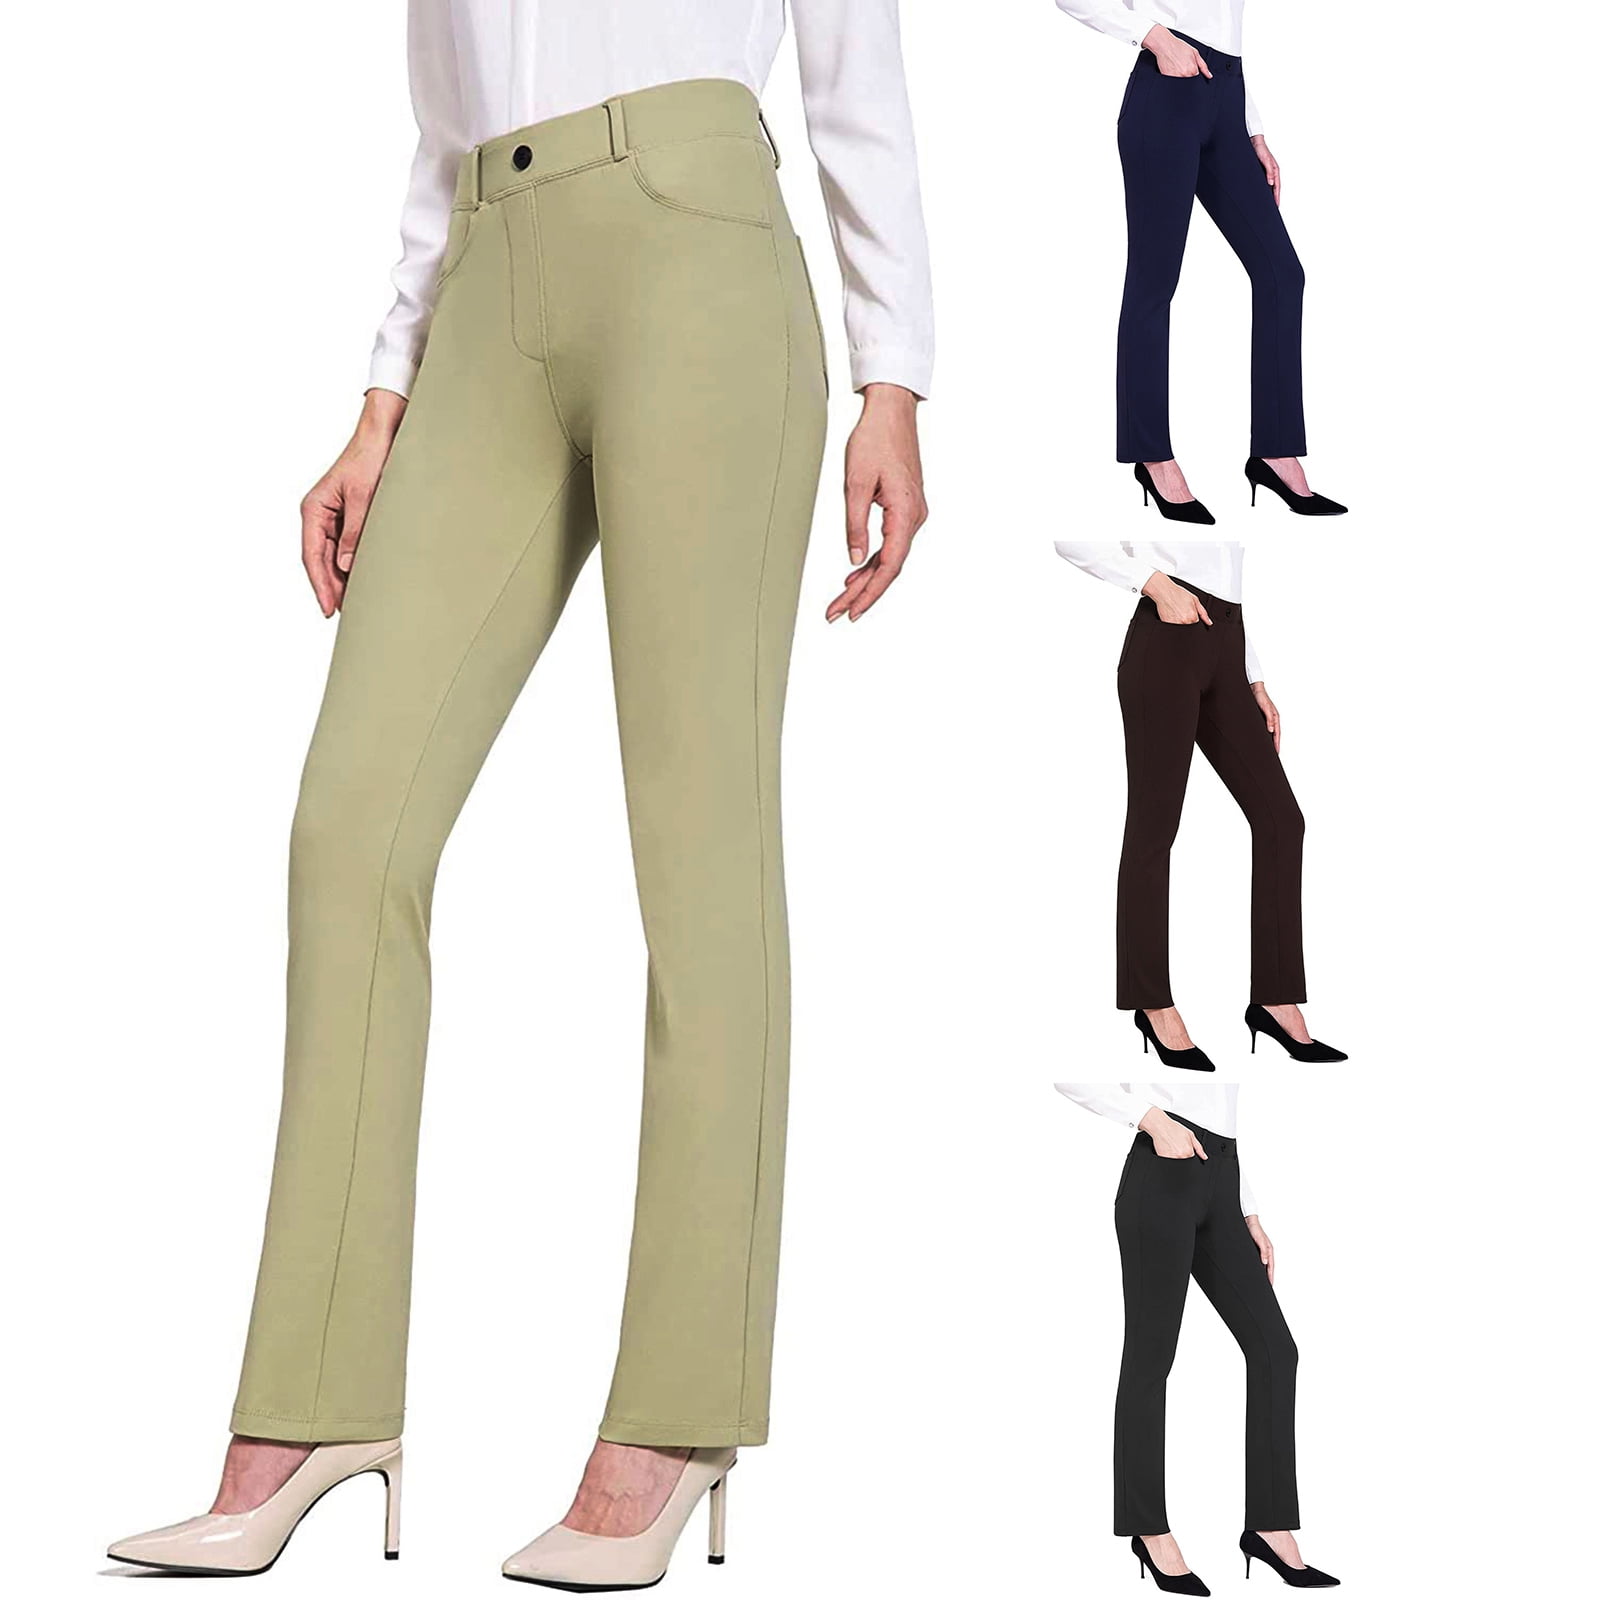 Sunisery Yoga Pants for Women Stretchy Work Business Slacks Dress Pants  Casual Straight Leg Trousers with Pockets